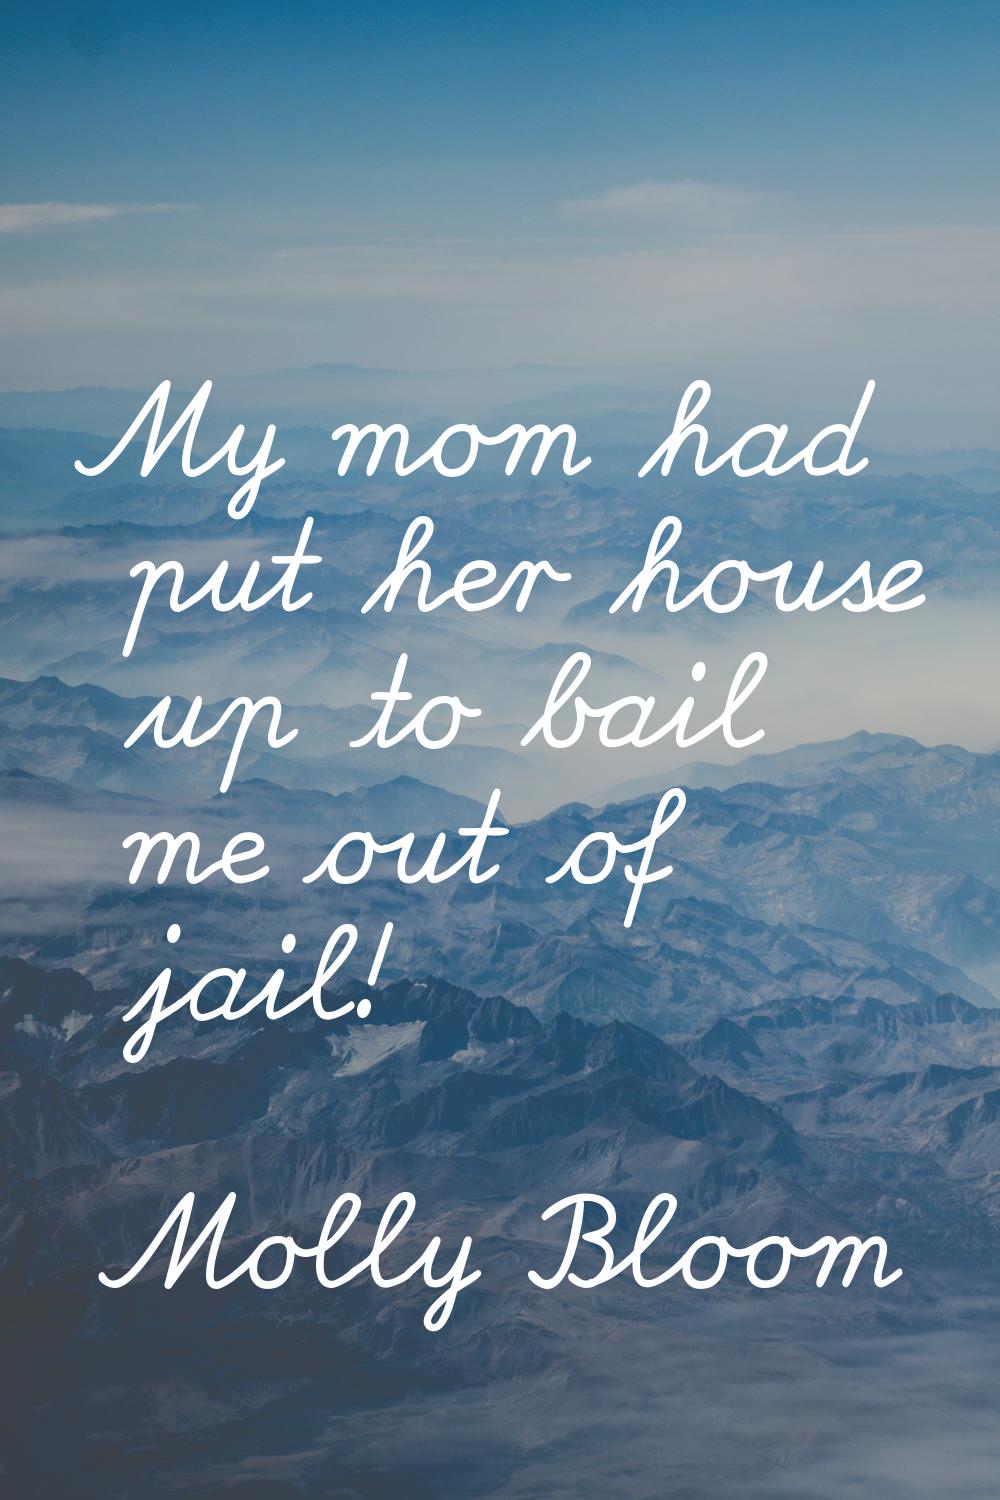 My mom had put her house up to bail me out of jail!